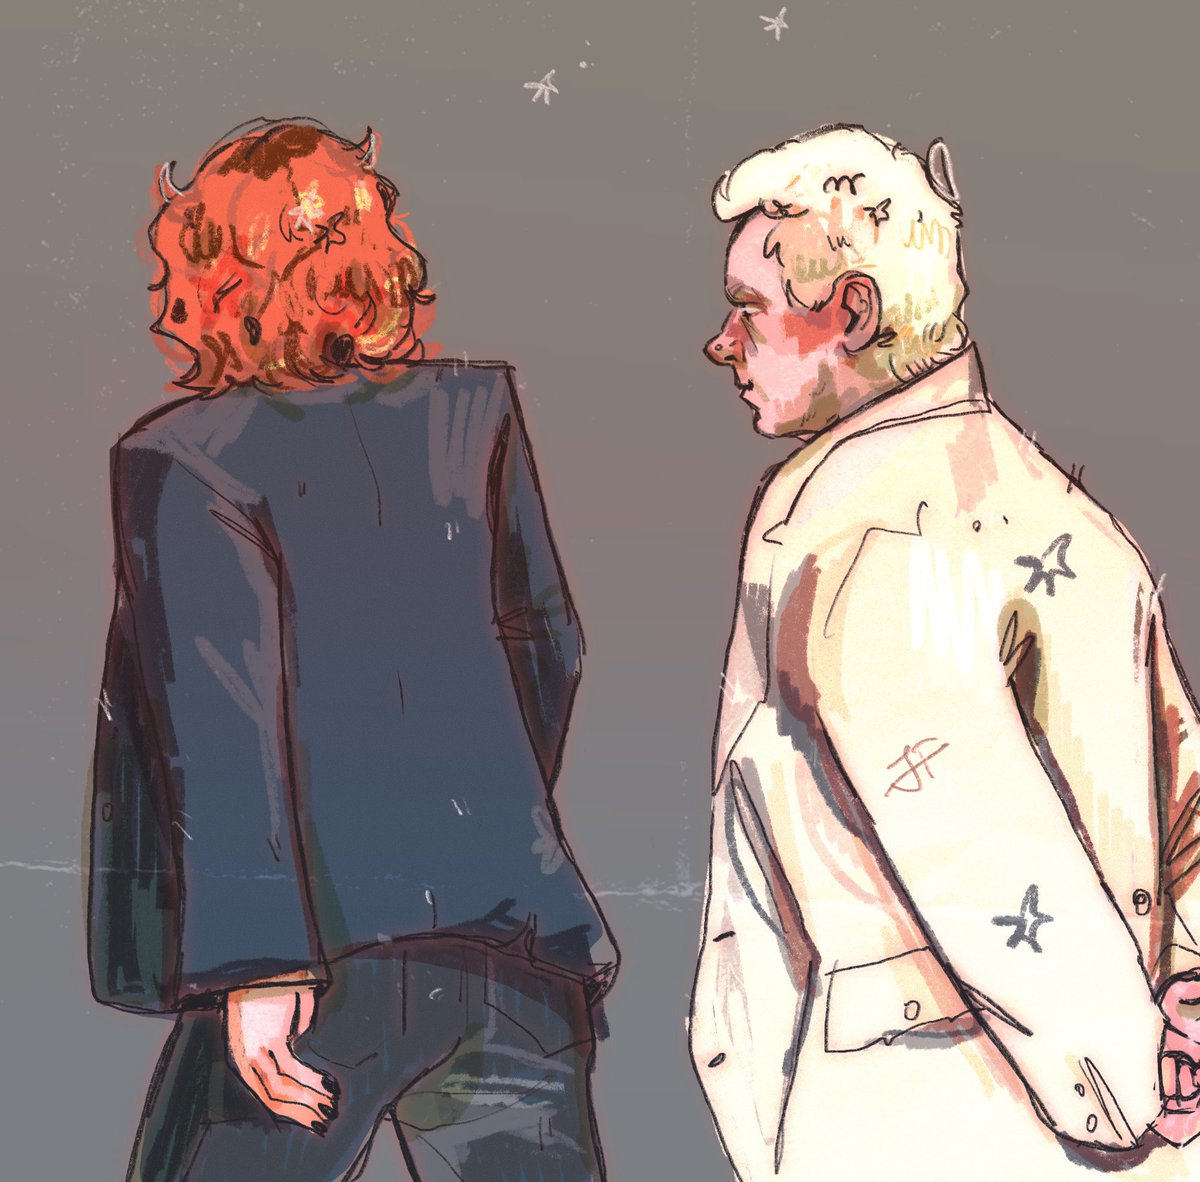 very quick sketch on the eve of the big day #GoodOmens2 #GoodOmensFanArt